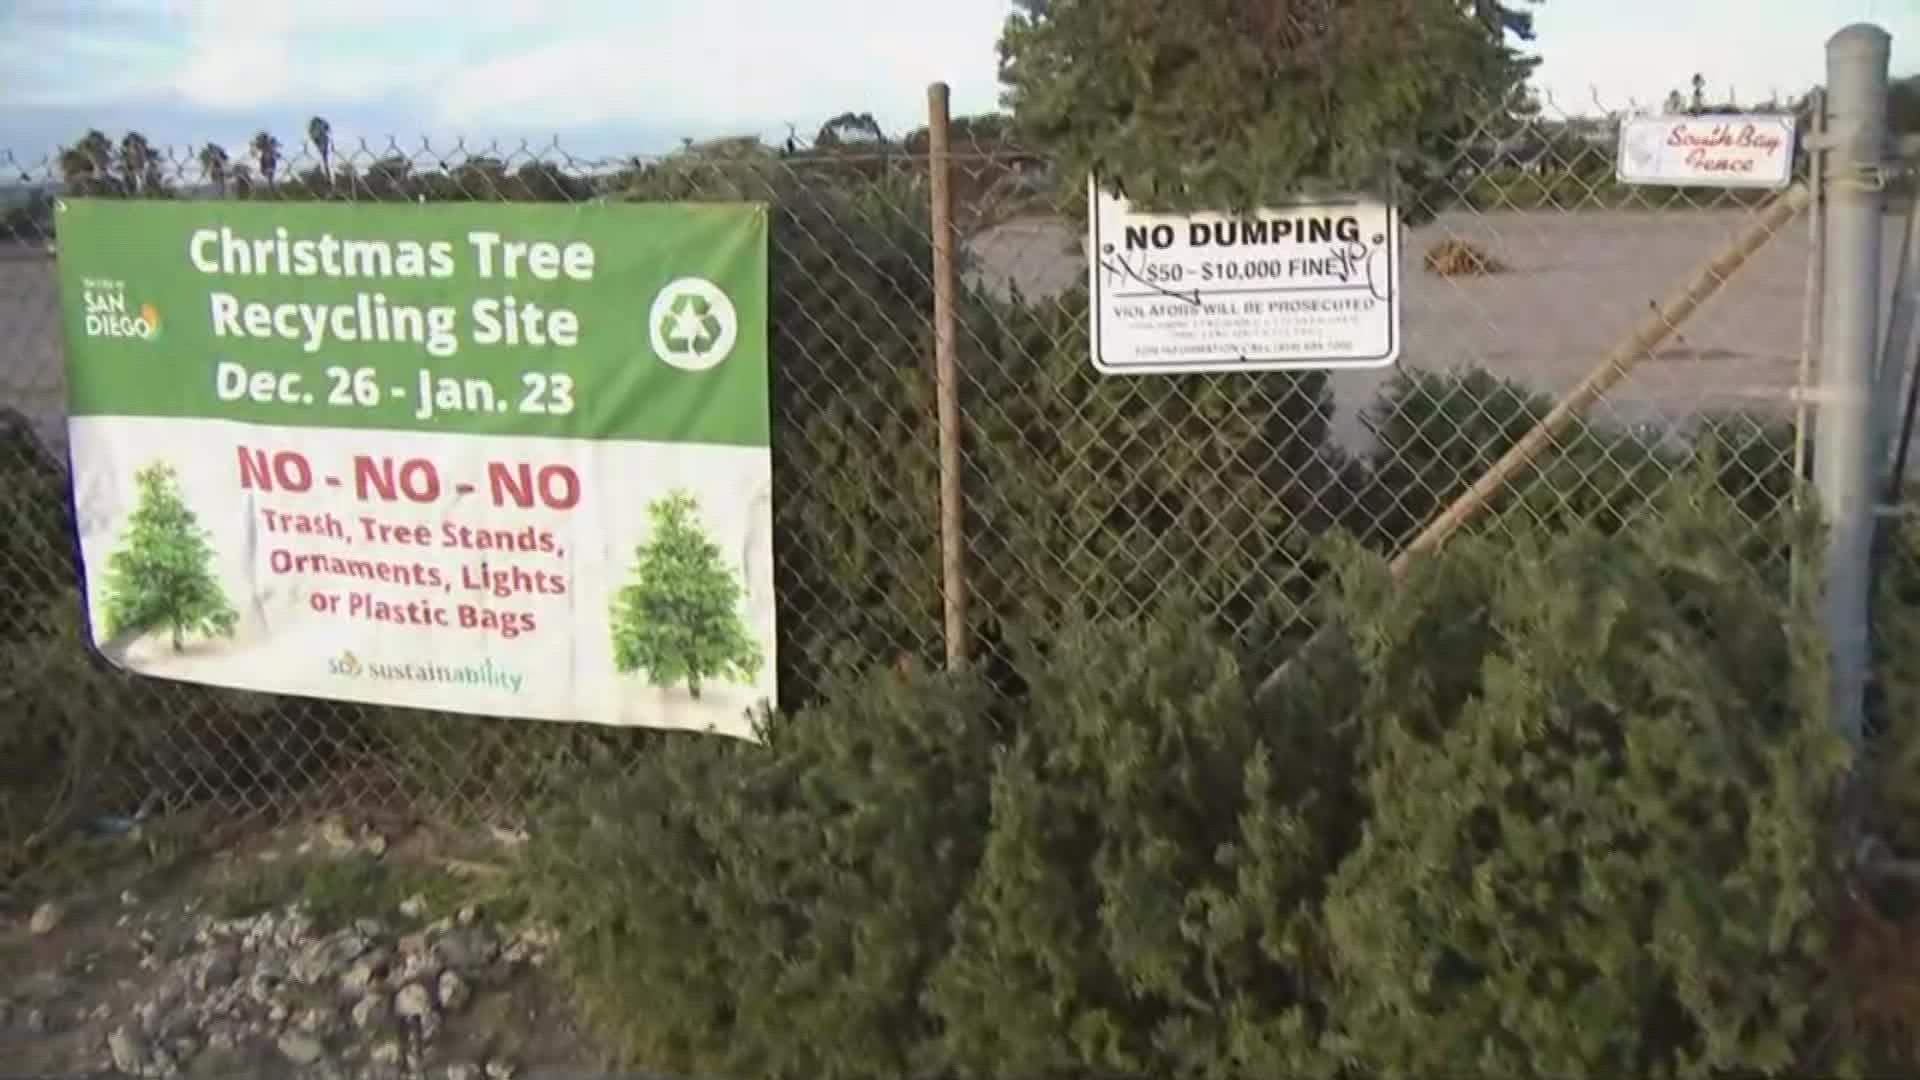 The annual Christmas Tree Recycling Program runs from Dec. 26 through Jan. 23 and features 17 drop-off locations in the city of San Diego.